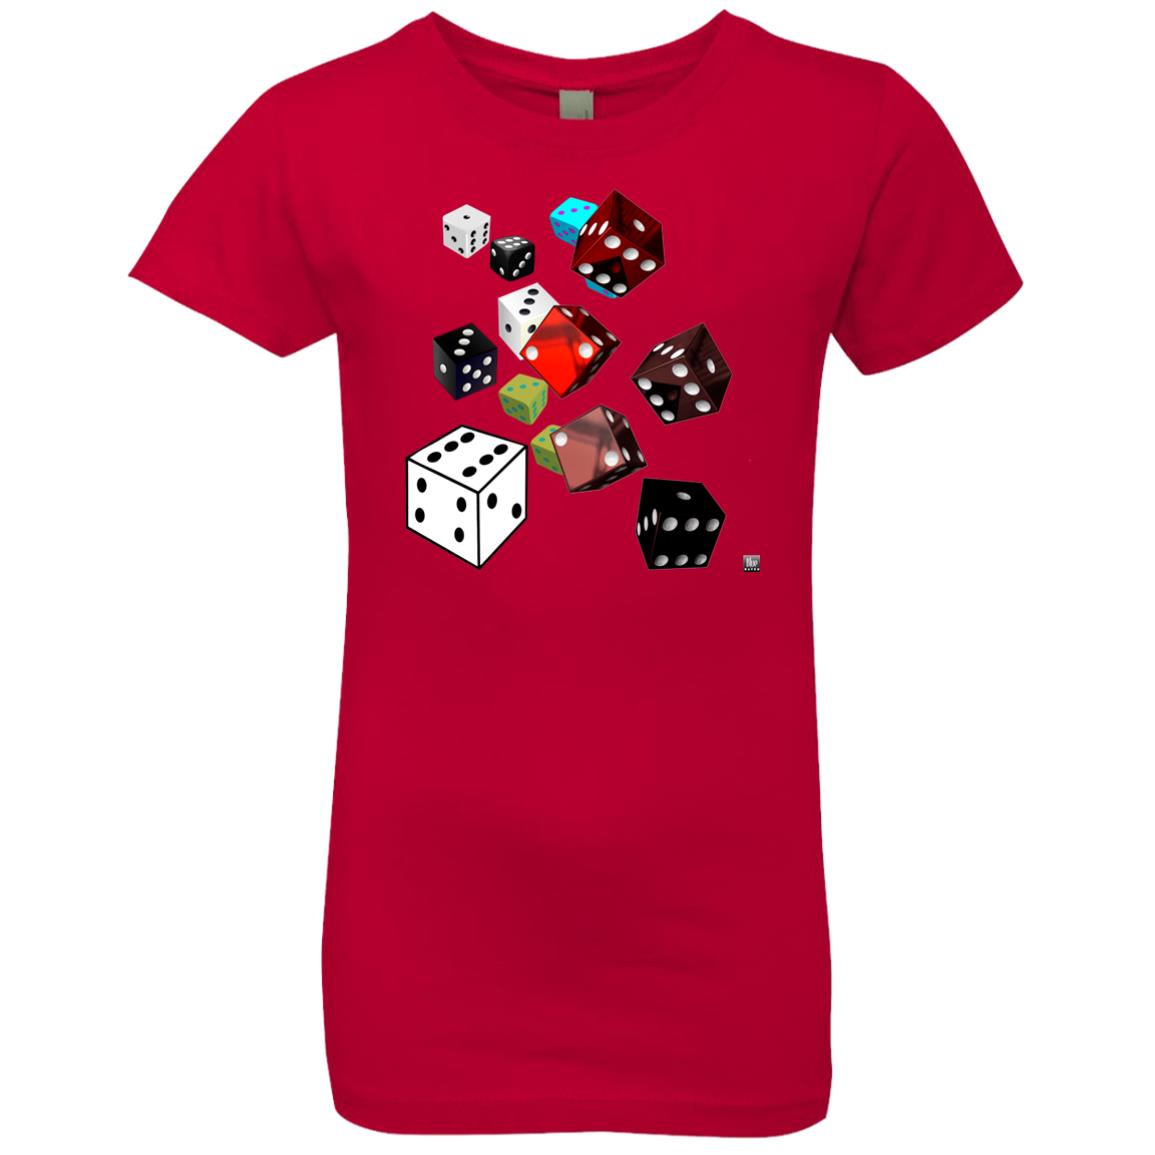 roll of the dice - Girl's Premium Cotton T-Shirt